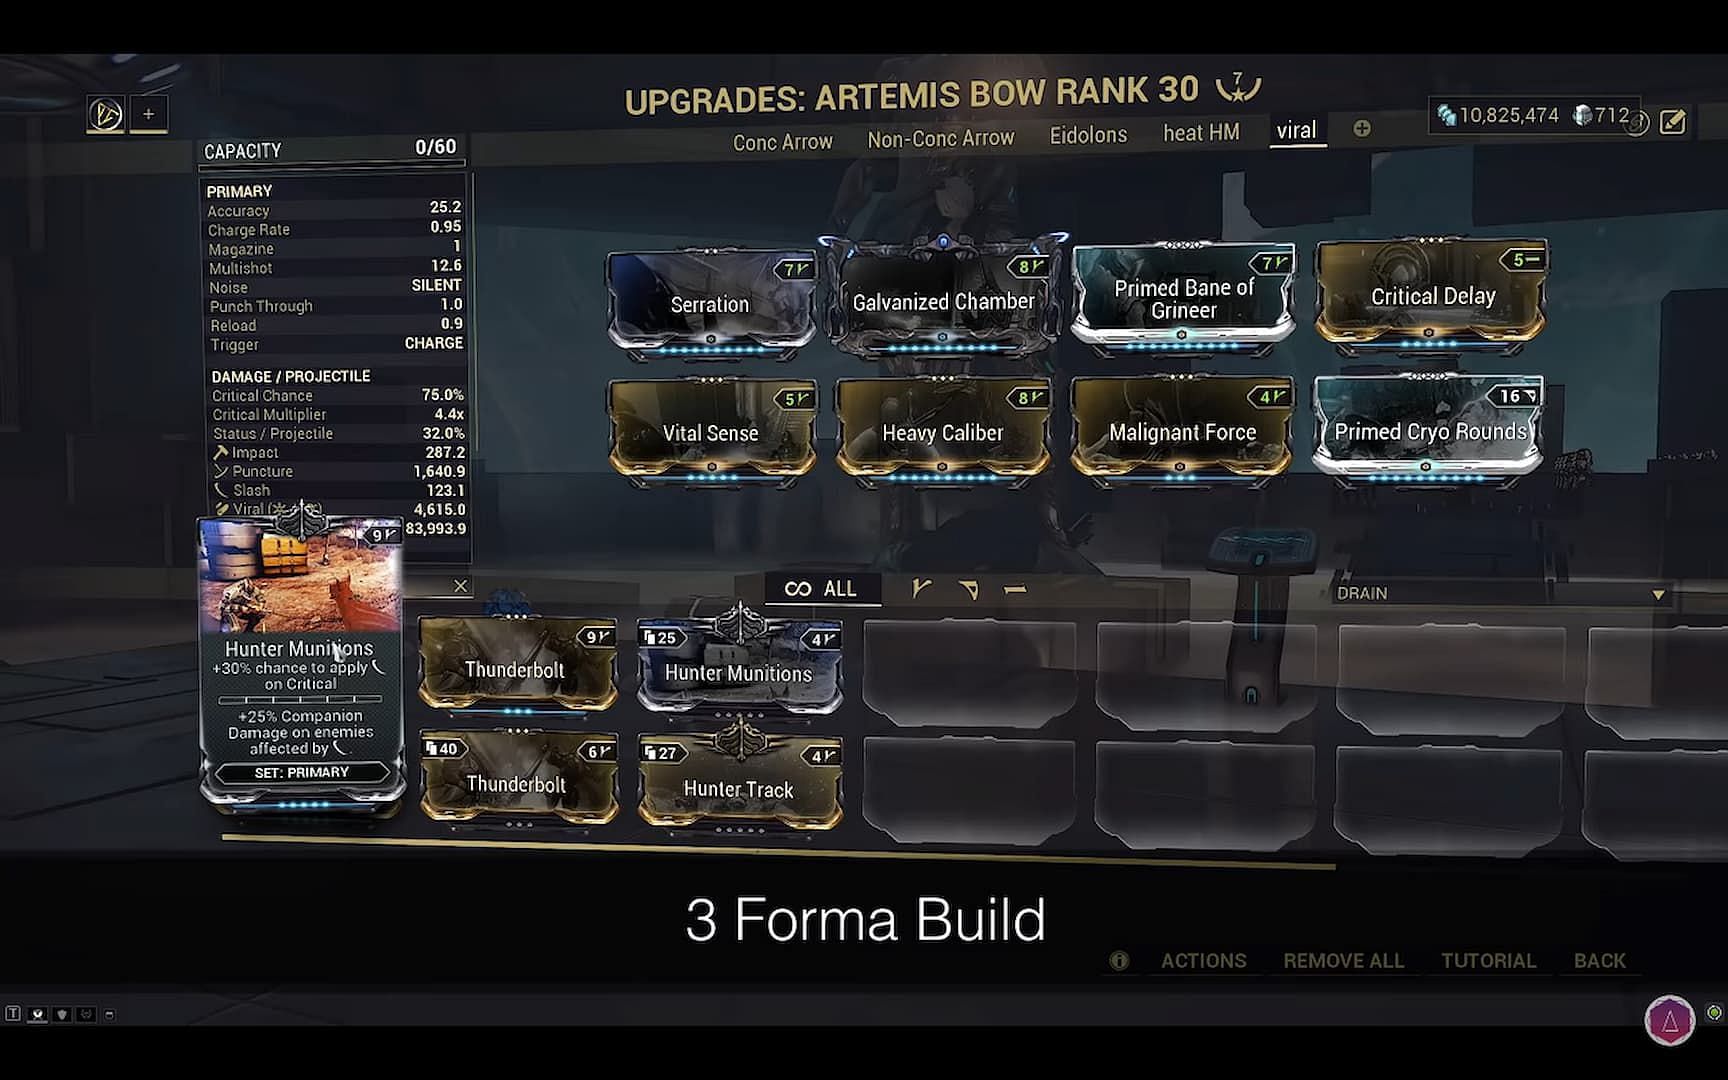 Standard Artemis bow build without Hunter Munitions (Image via Digital Extremes)